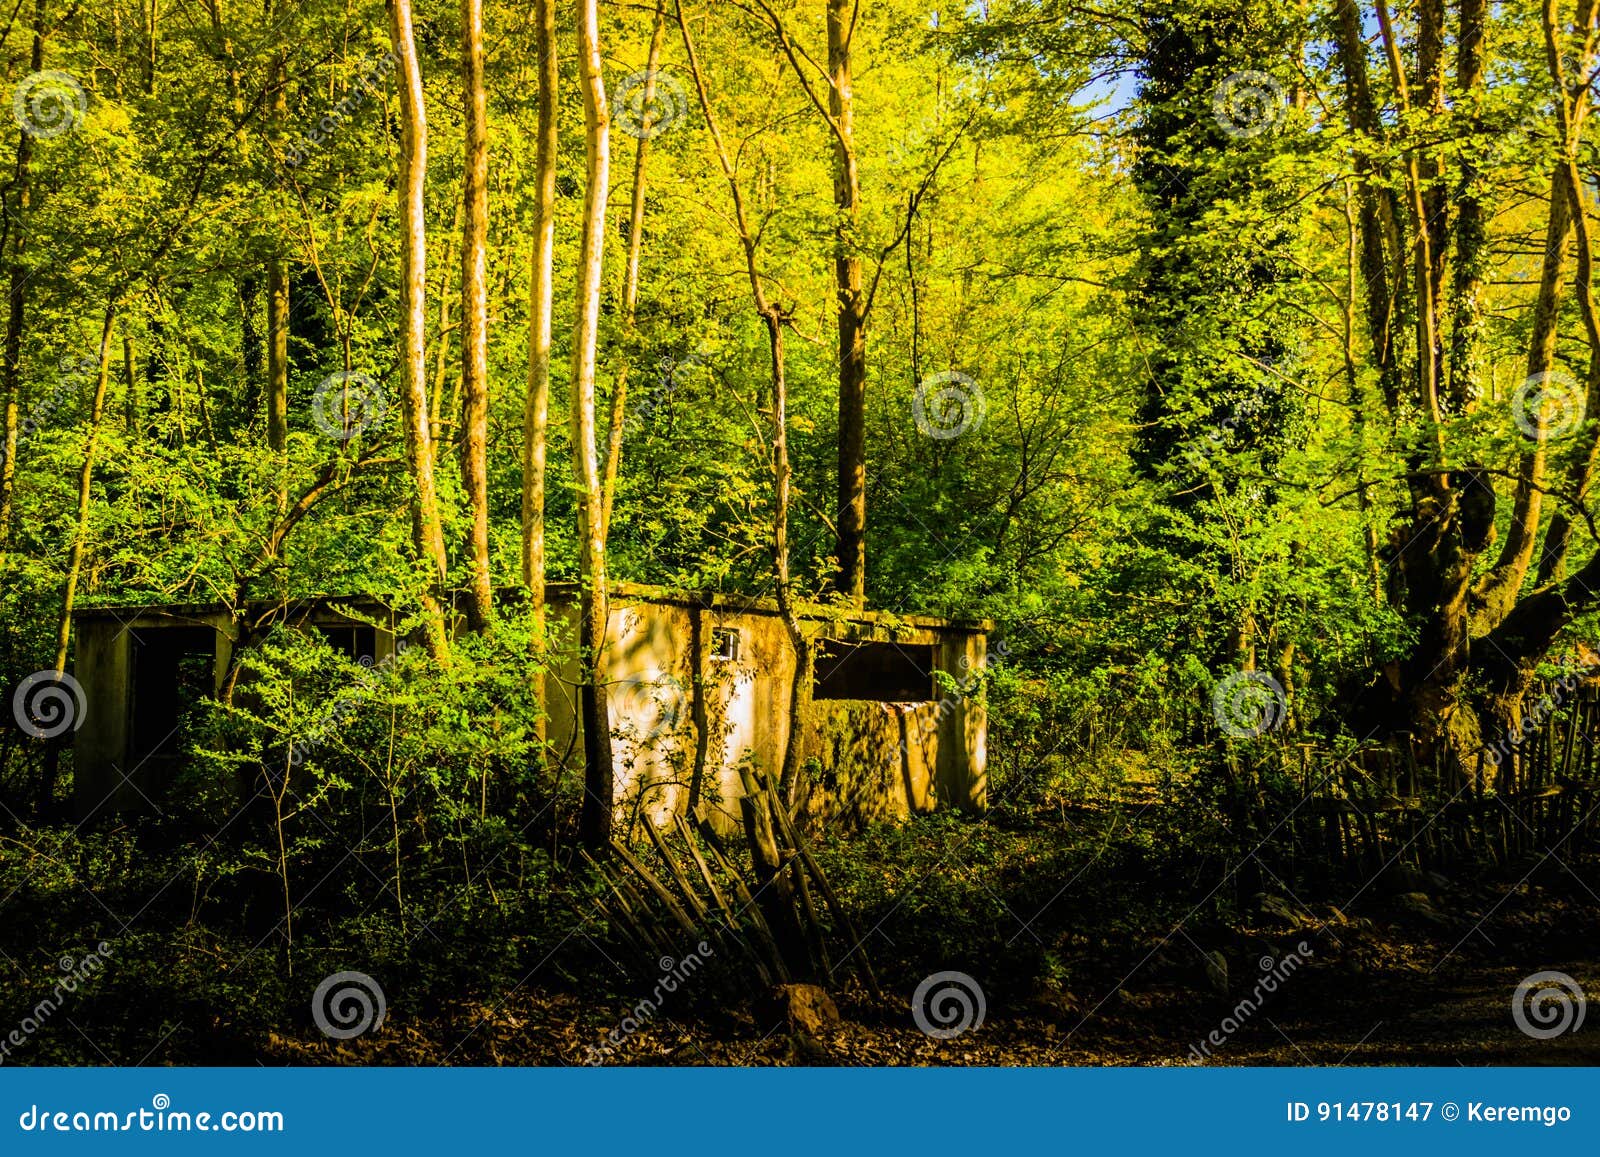 desolated house in the woods